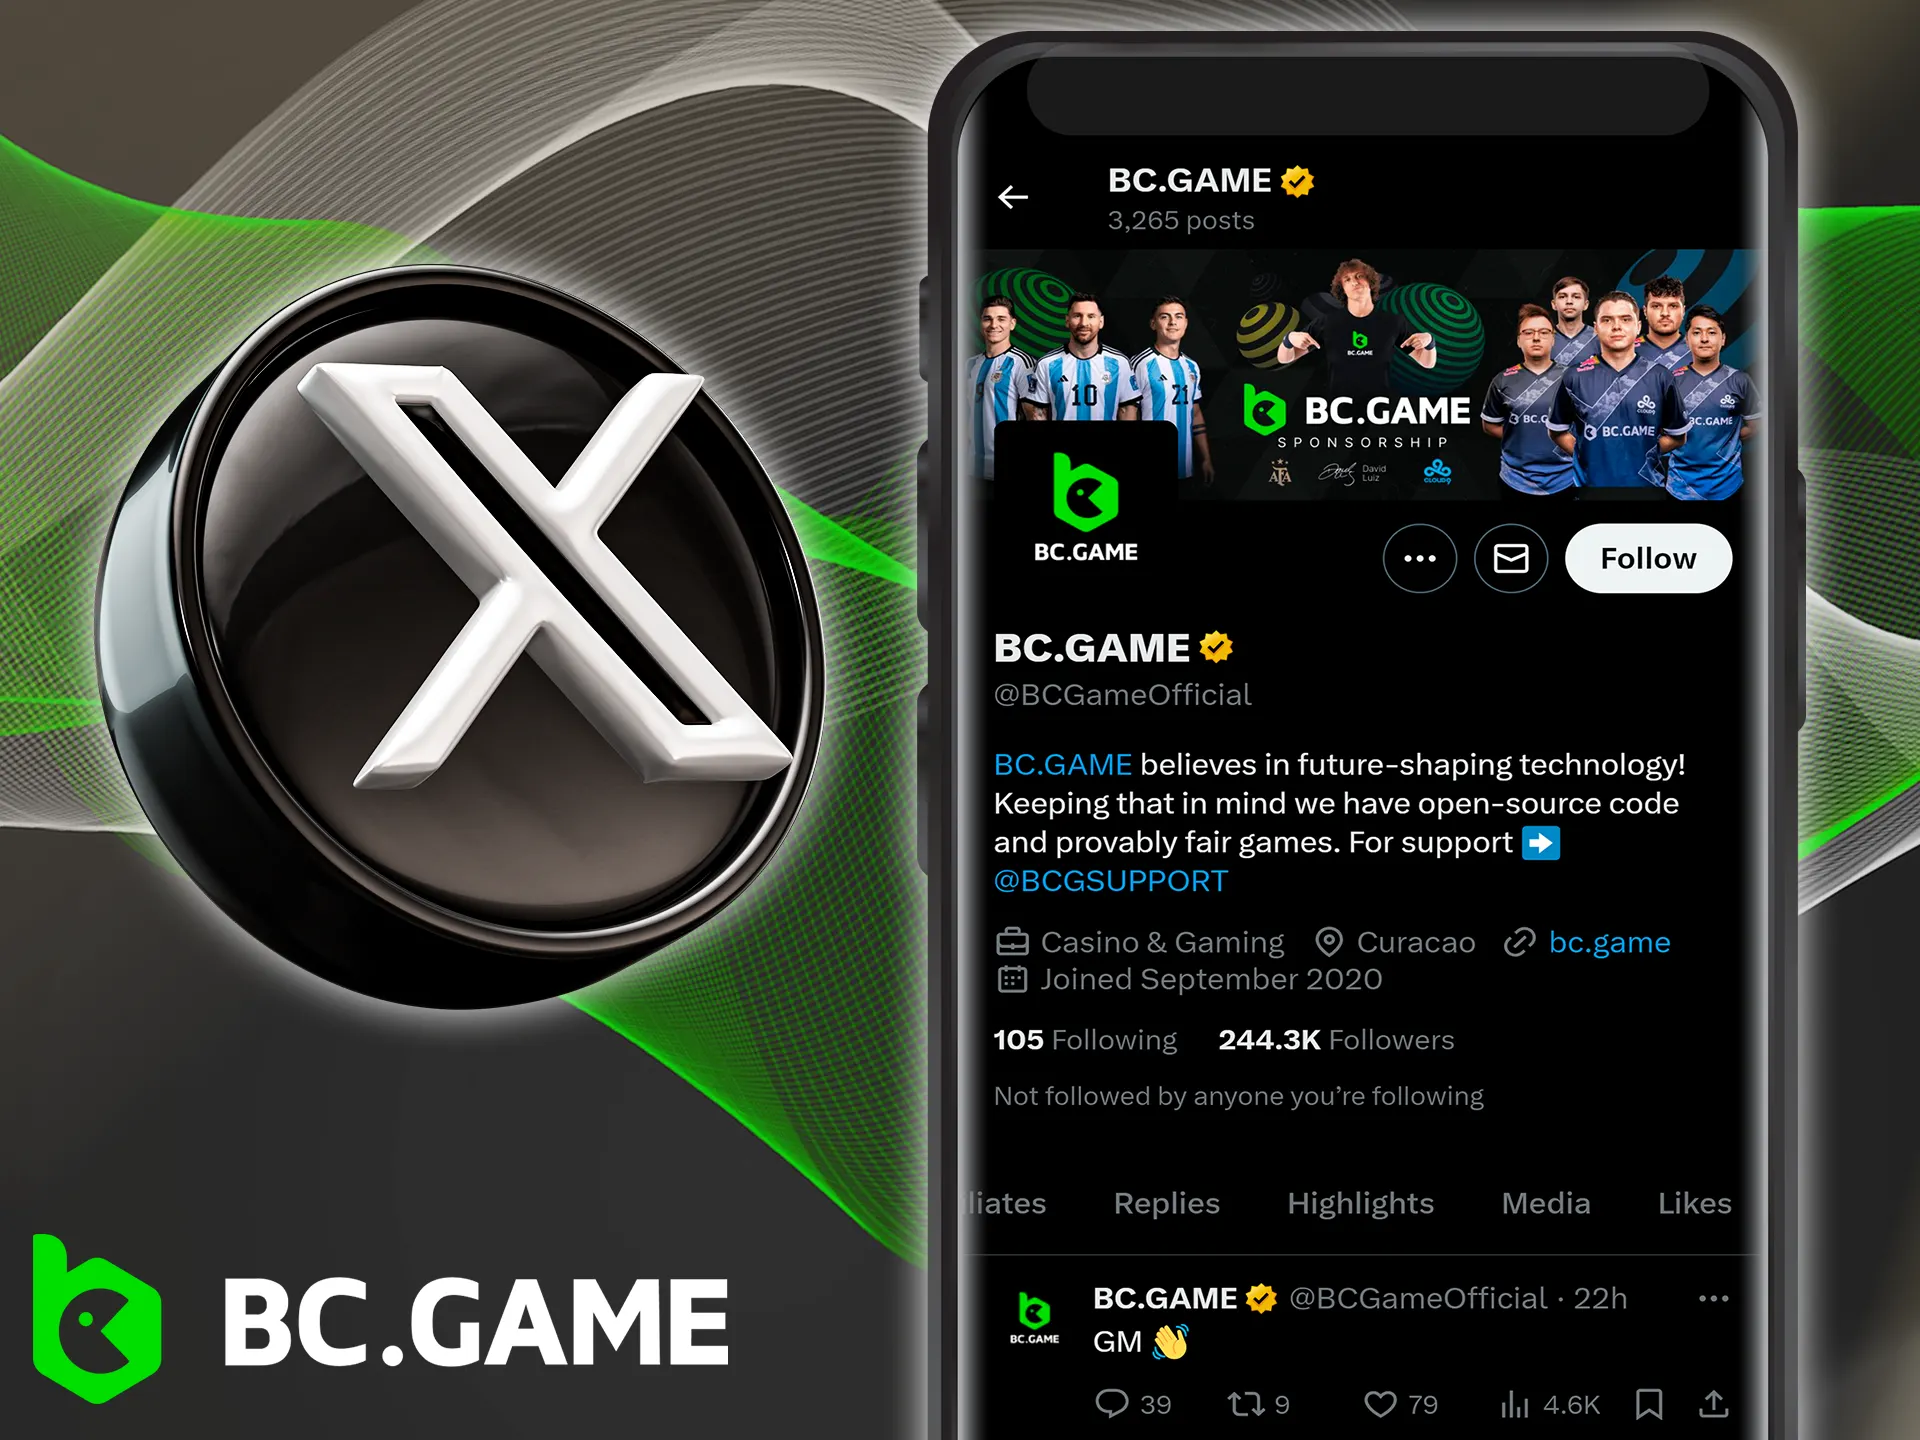 Subscribe to BC Game's official Twitter account to stay up to date with updates.